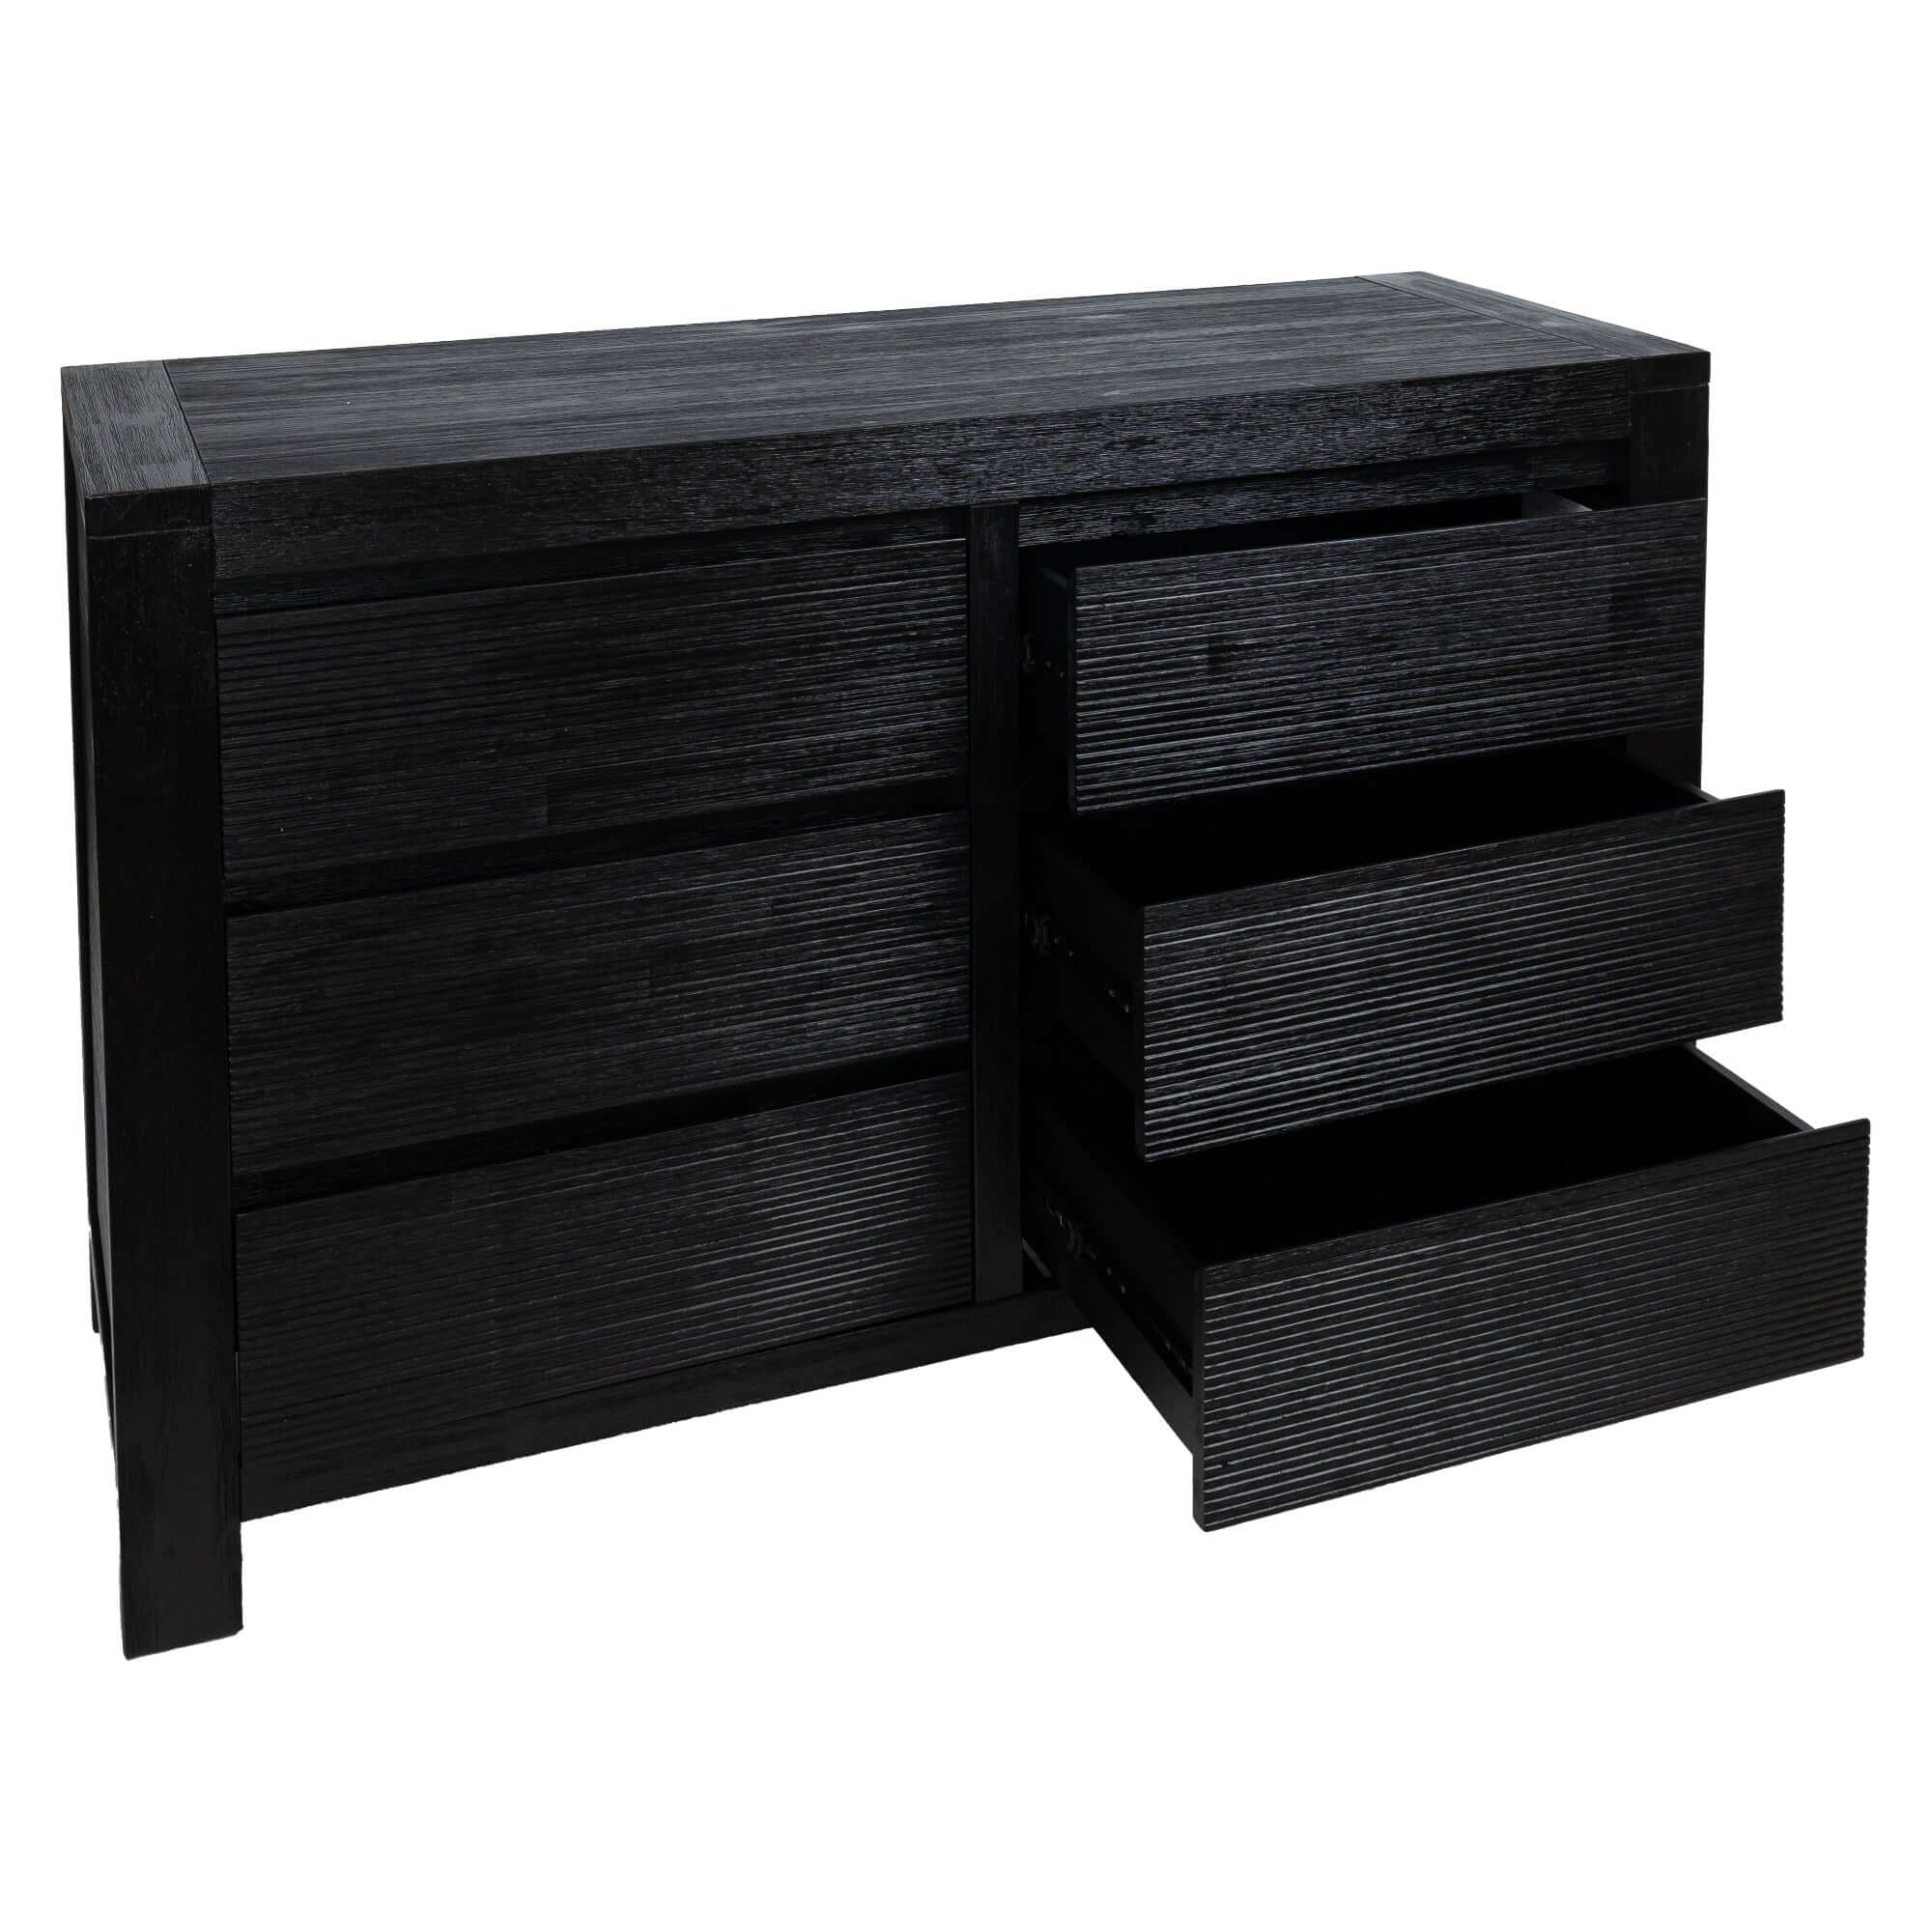 Tofino Dresser 6 Chest of Drawers Solid Wood Bedroom Storage Cabinet - Black-Upinteriors